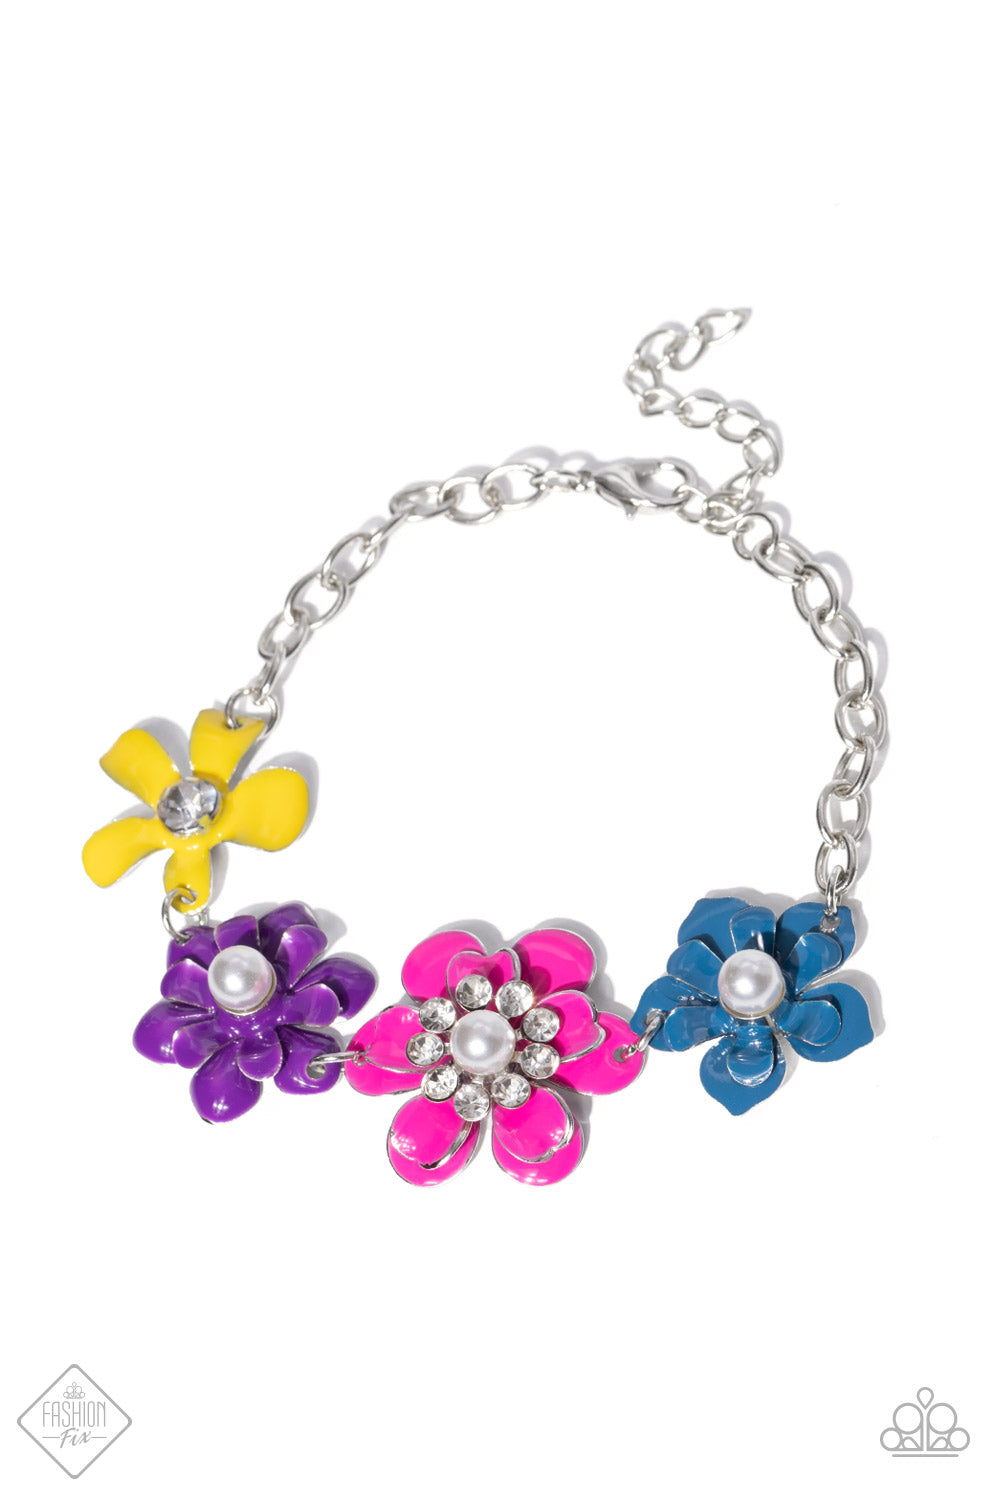 Flower Patch Fantasy - Multi Color Flower Bracelet - Paparazzi Accessories -A collection of colorful flowers link around the wrist to create a vibrant statement piece. A mix of shimmery pearls and sparkling white rhinestones decorate the center of each flower, infusing the piece with handcrafted whimsicality. Features an adjustable clasp closure fashion bracelet.  Bejeweled Accessories By Kristie - Trendy fashion jewelry for everyone -